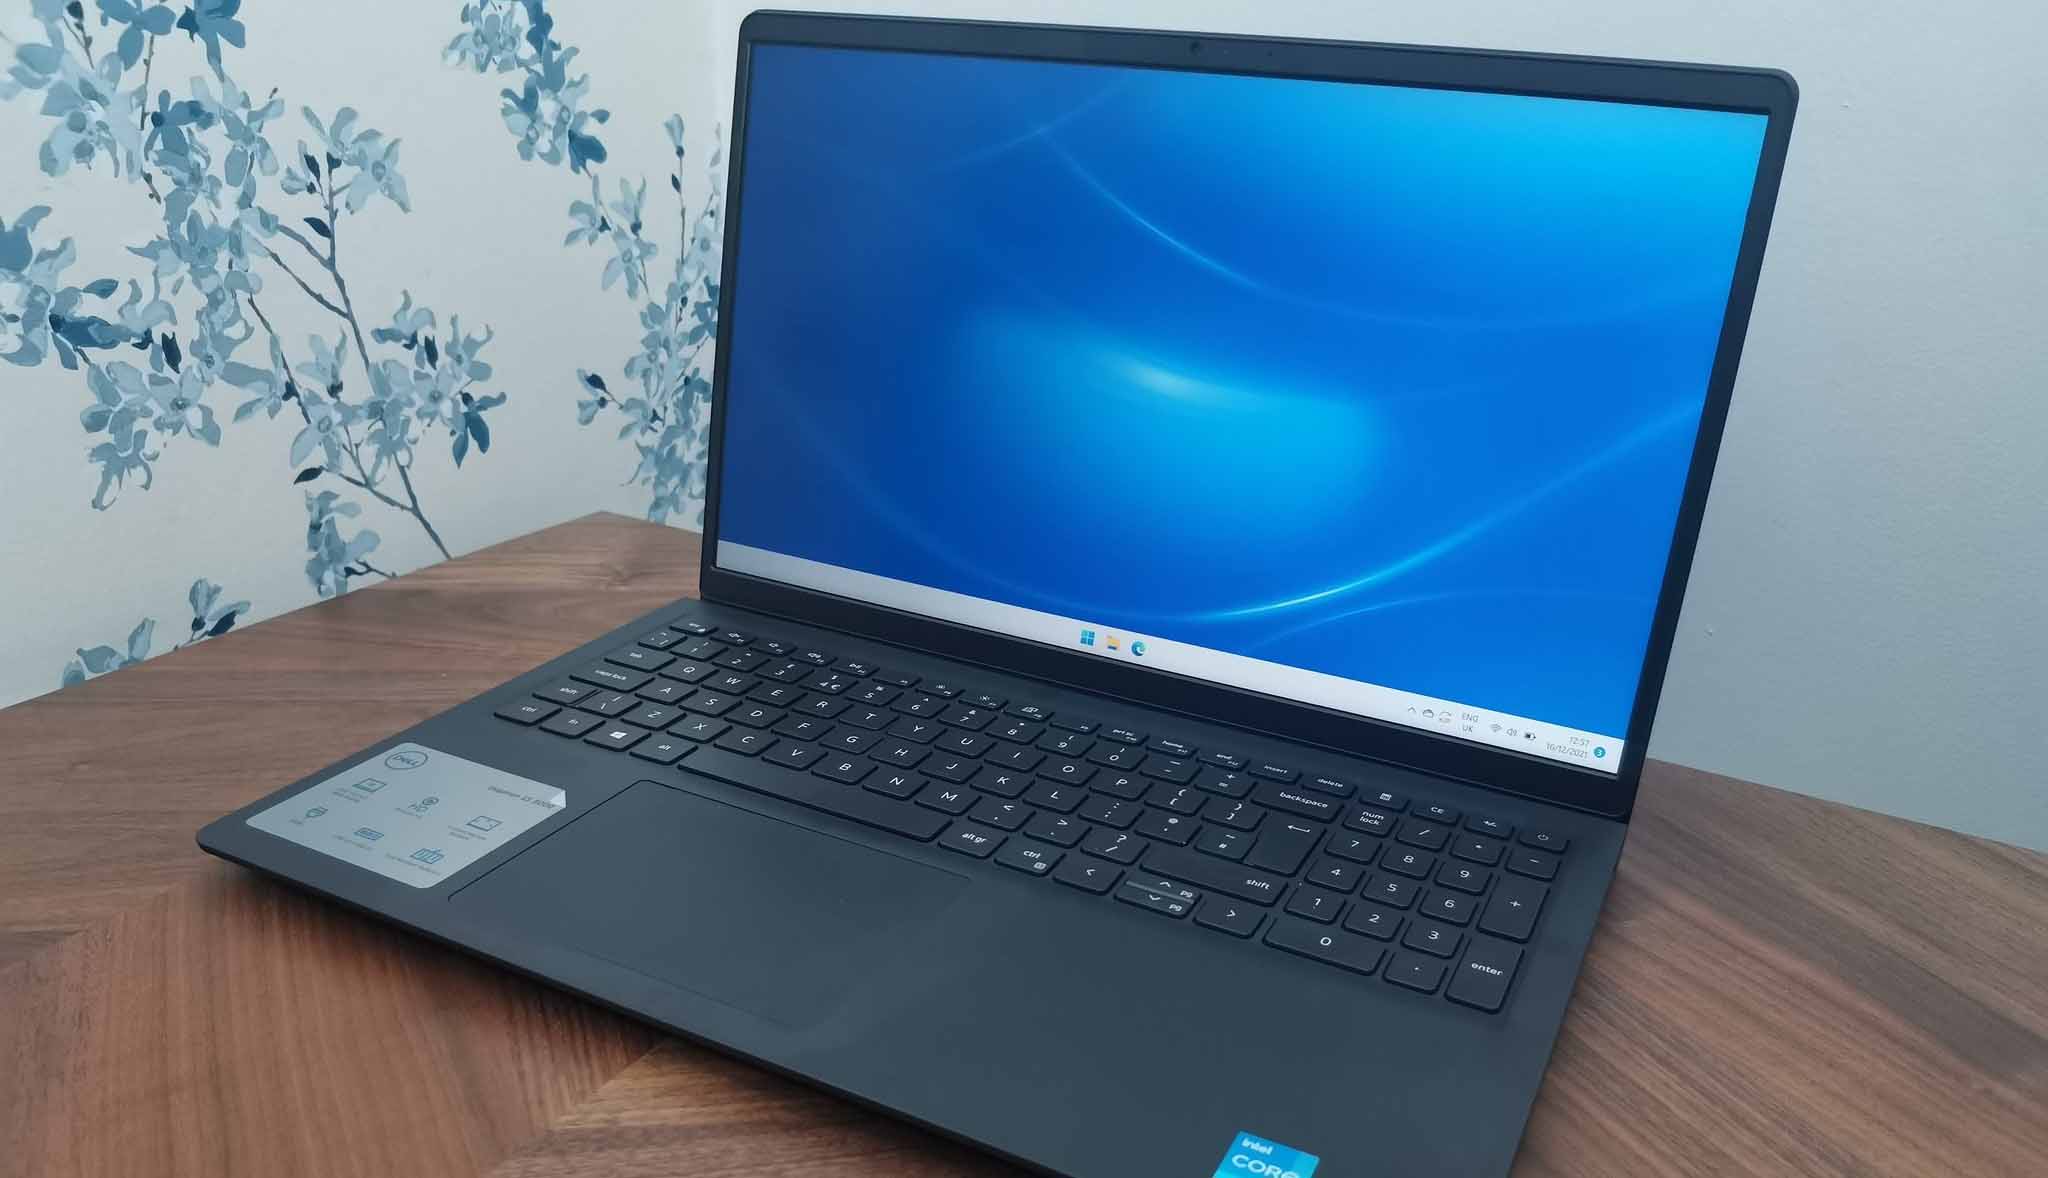 How Can I Choose The Best Laptops For Zoom Meetings